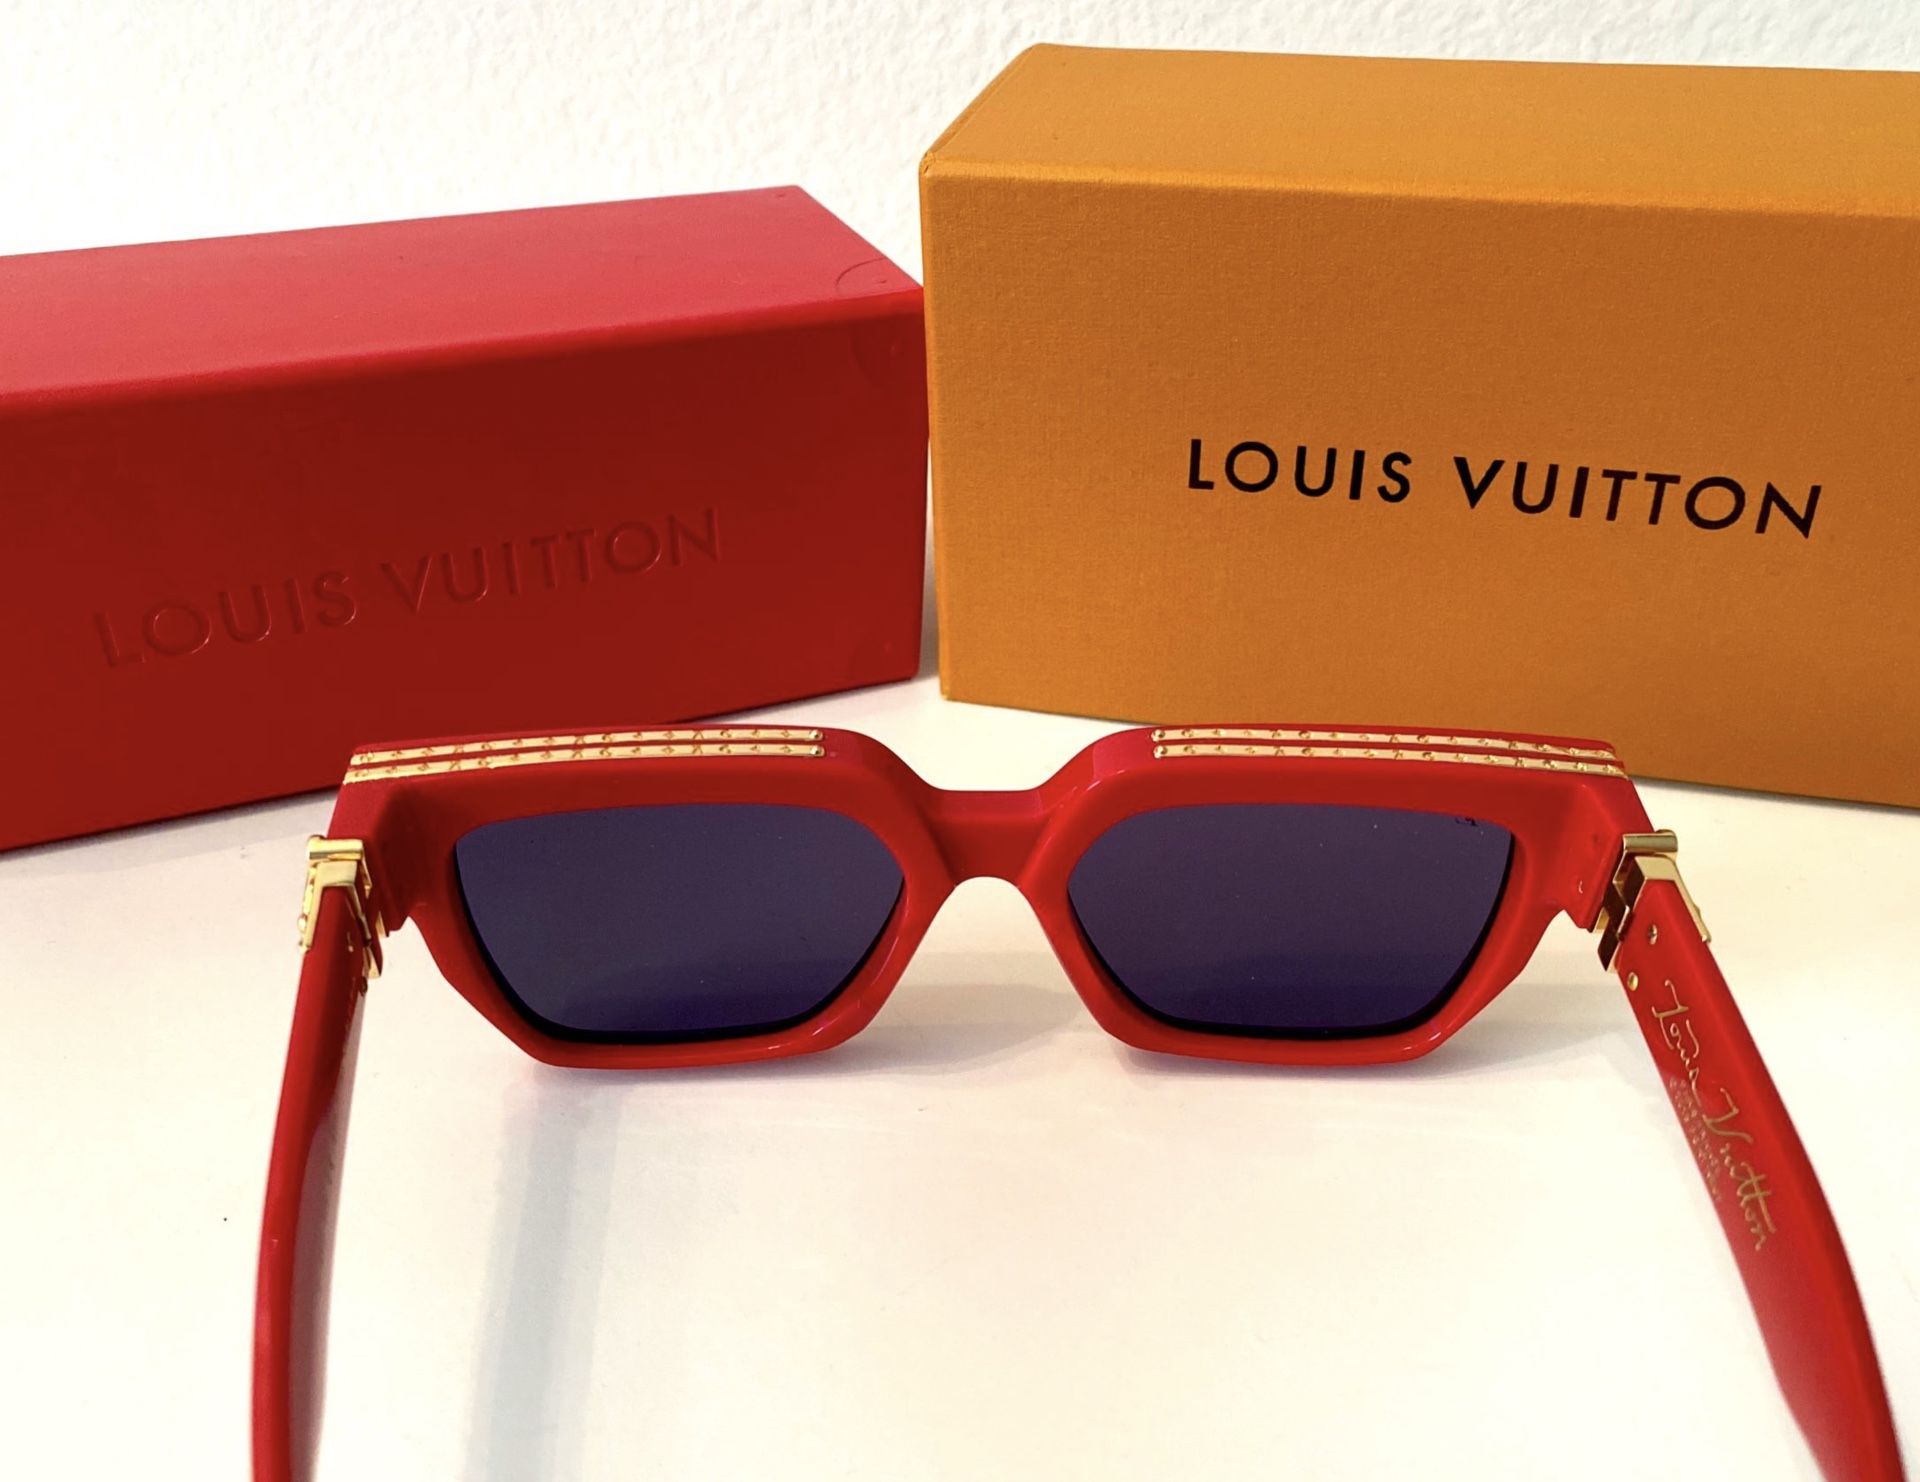 Louis Vuitton Evidence Sunglasses for Sale in Anaheim, CA - OfferUp